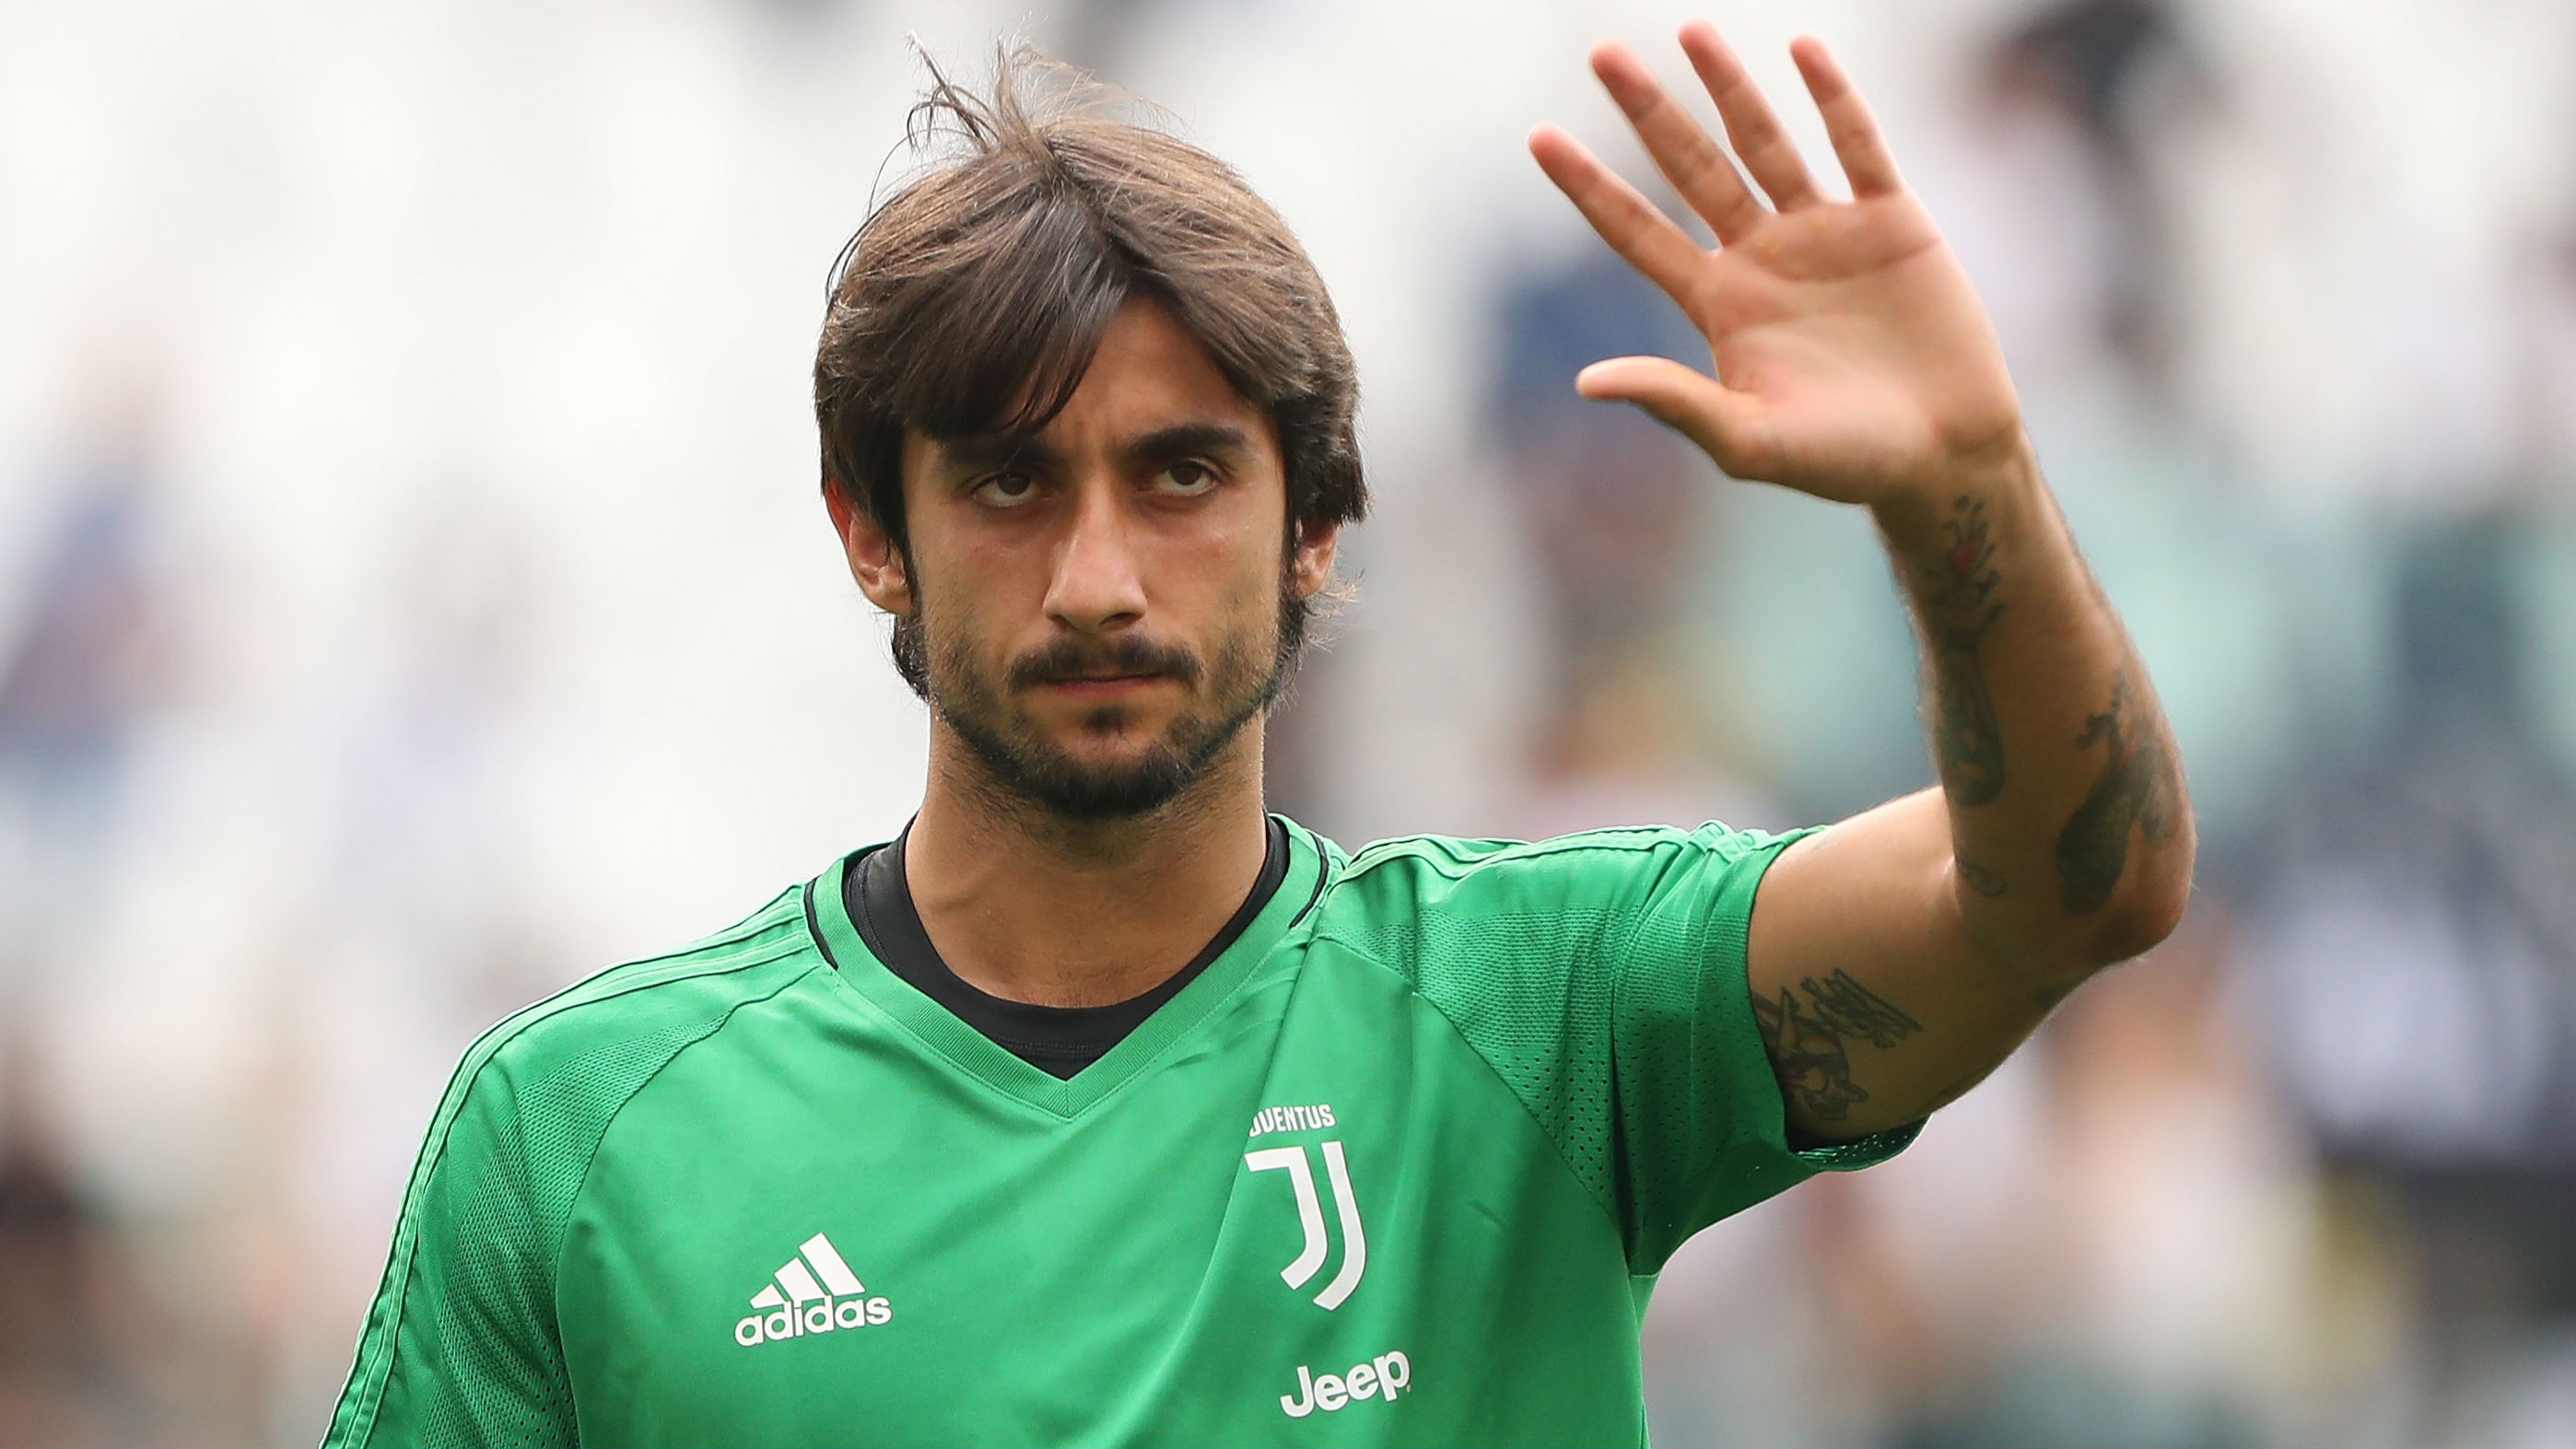 Mattia Perin says an "exciting adventure" awaits at Benfica as he edges closer to sealing a move to the Portuguese champions from Juventus.